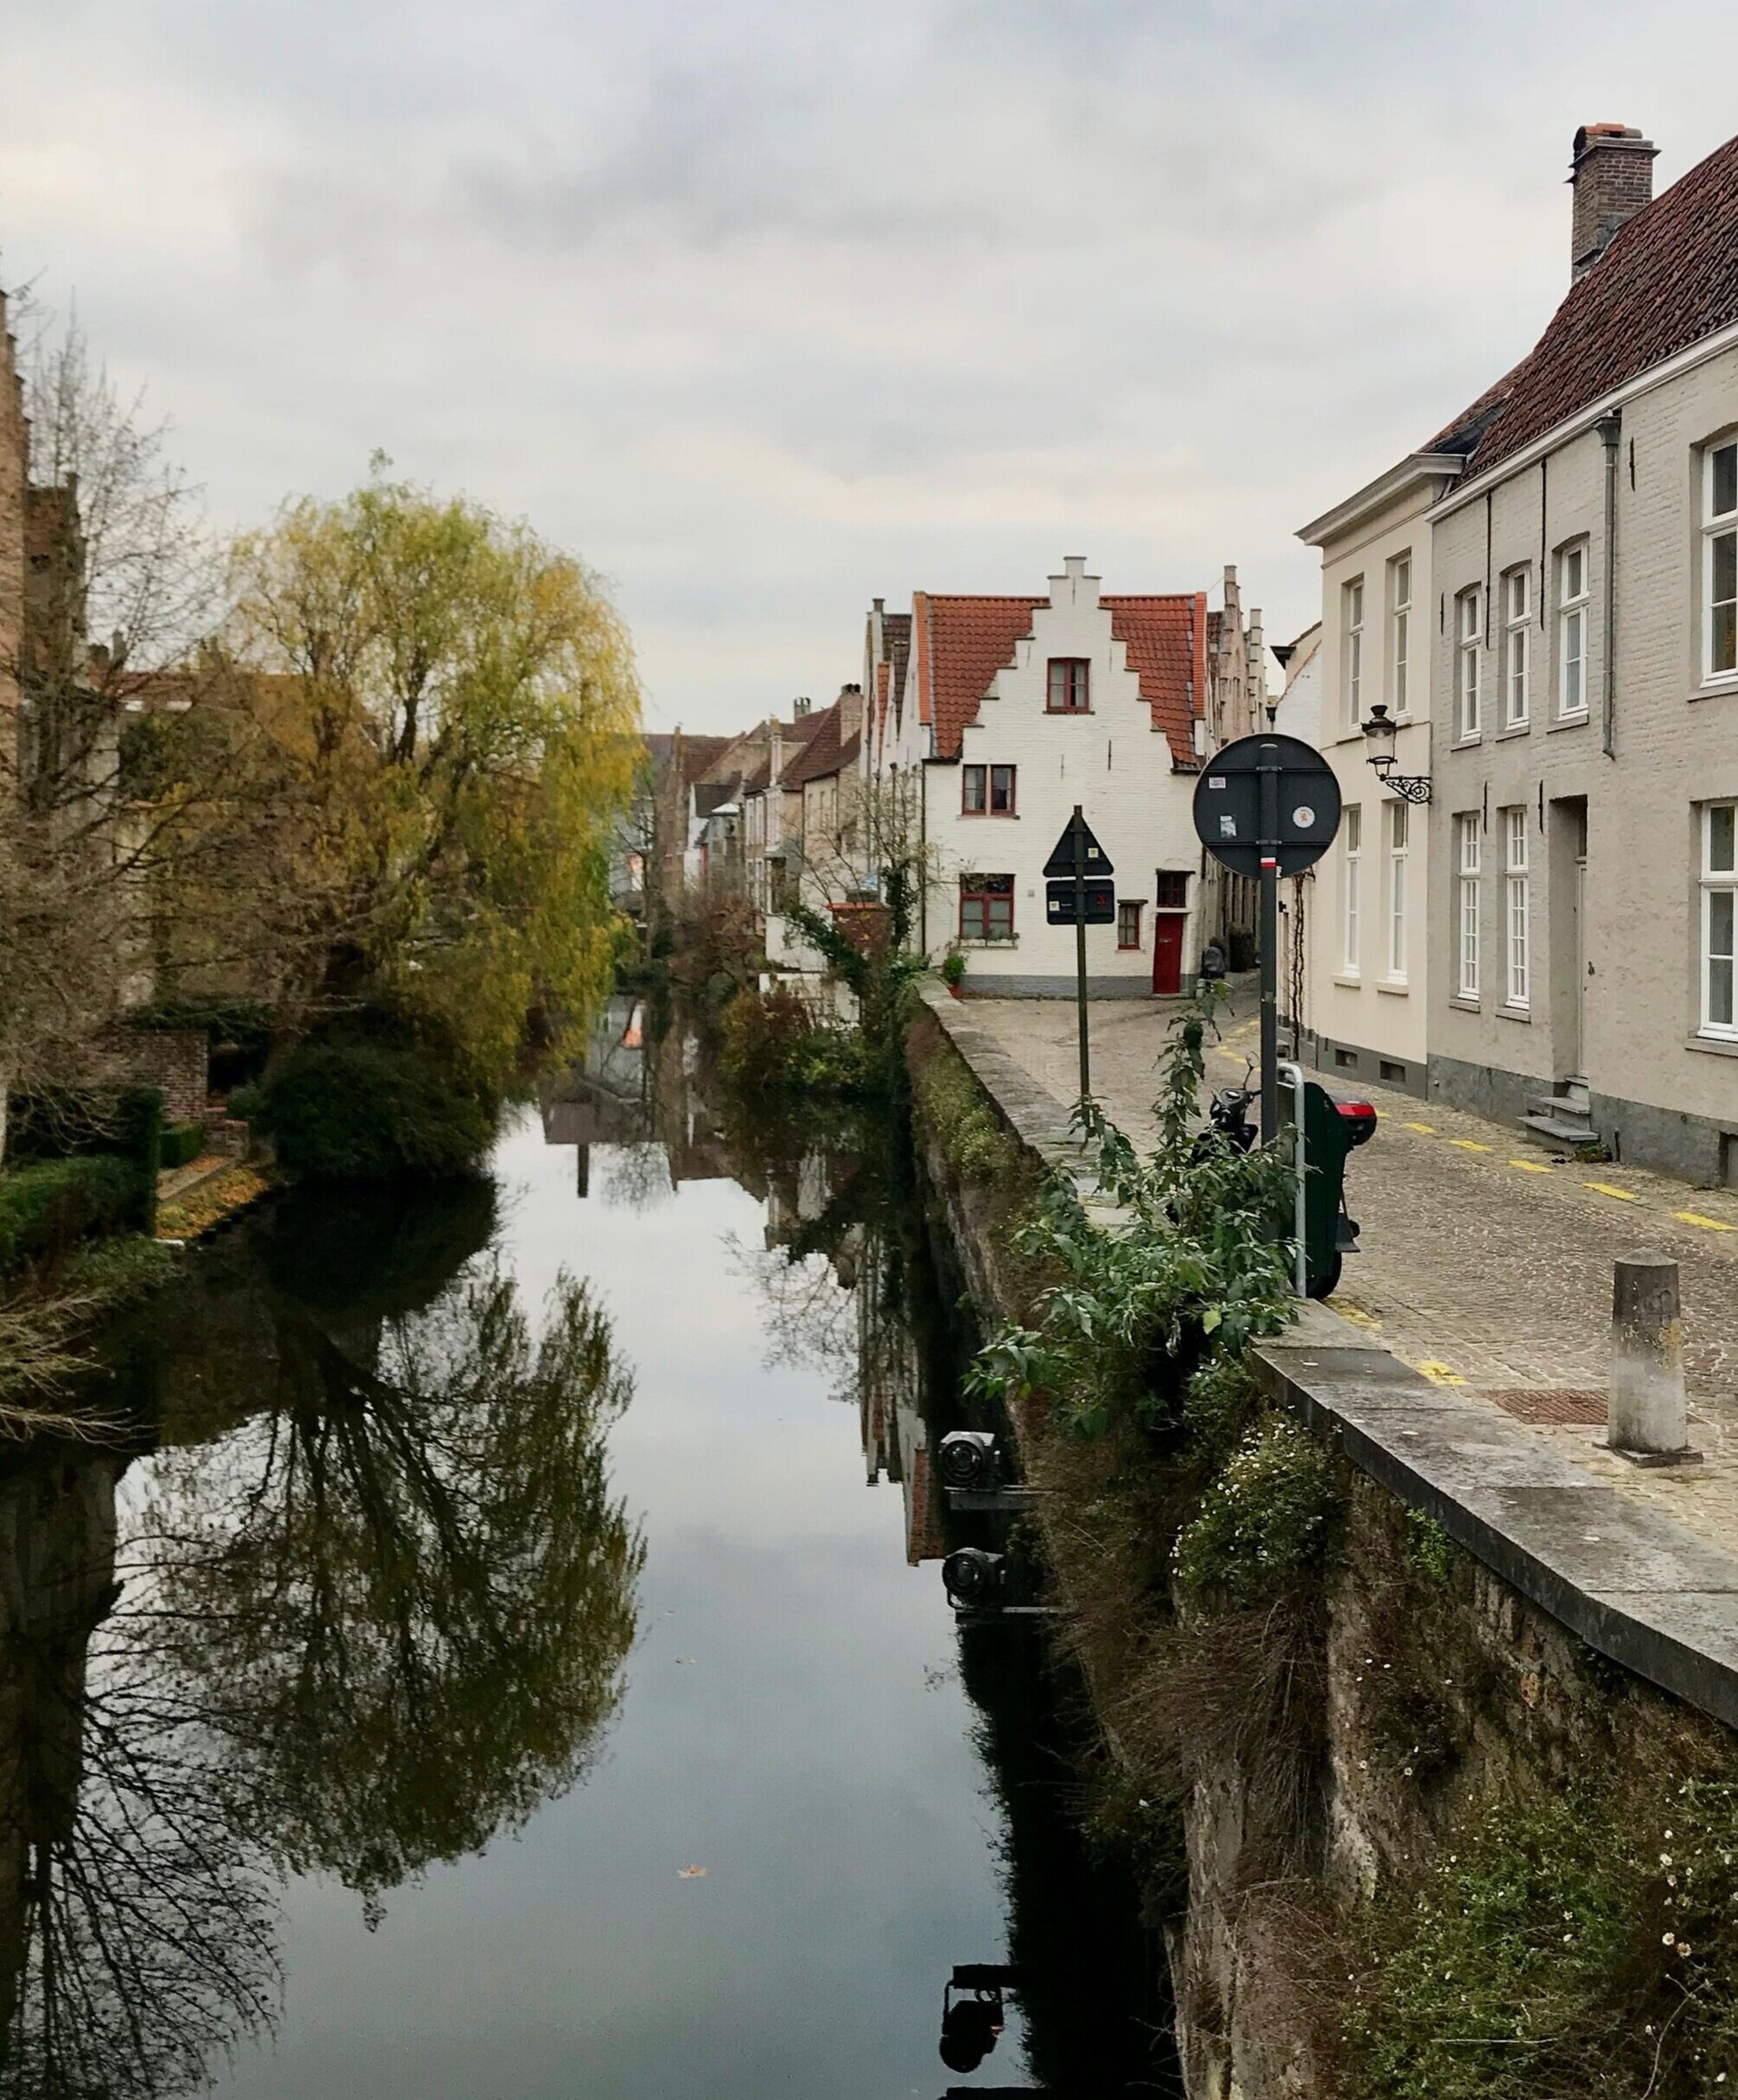 These are some of the charming canals that make Brugges such a wonderful backdrop for a Christmas Market in Belgium.